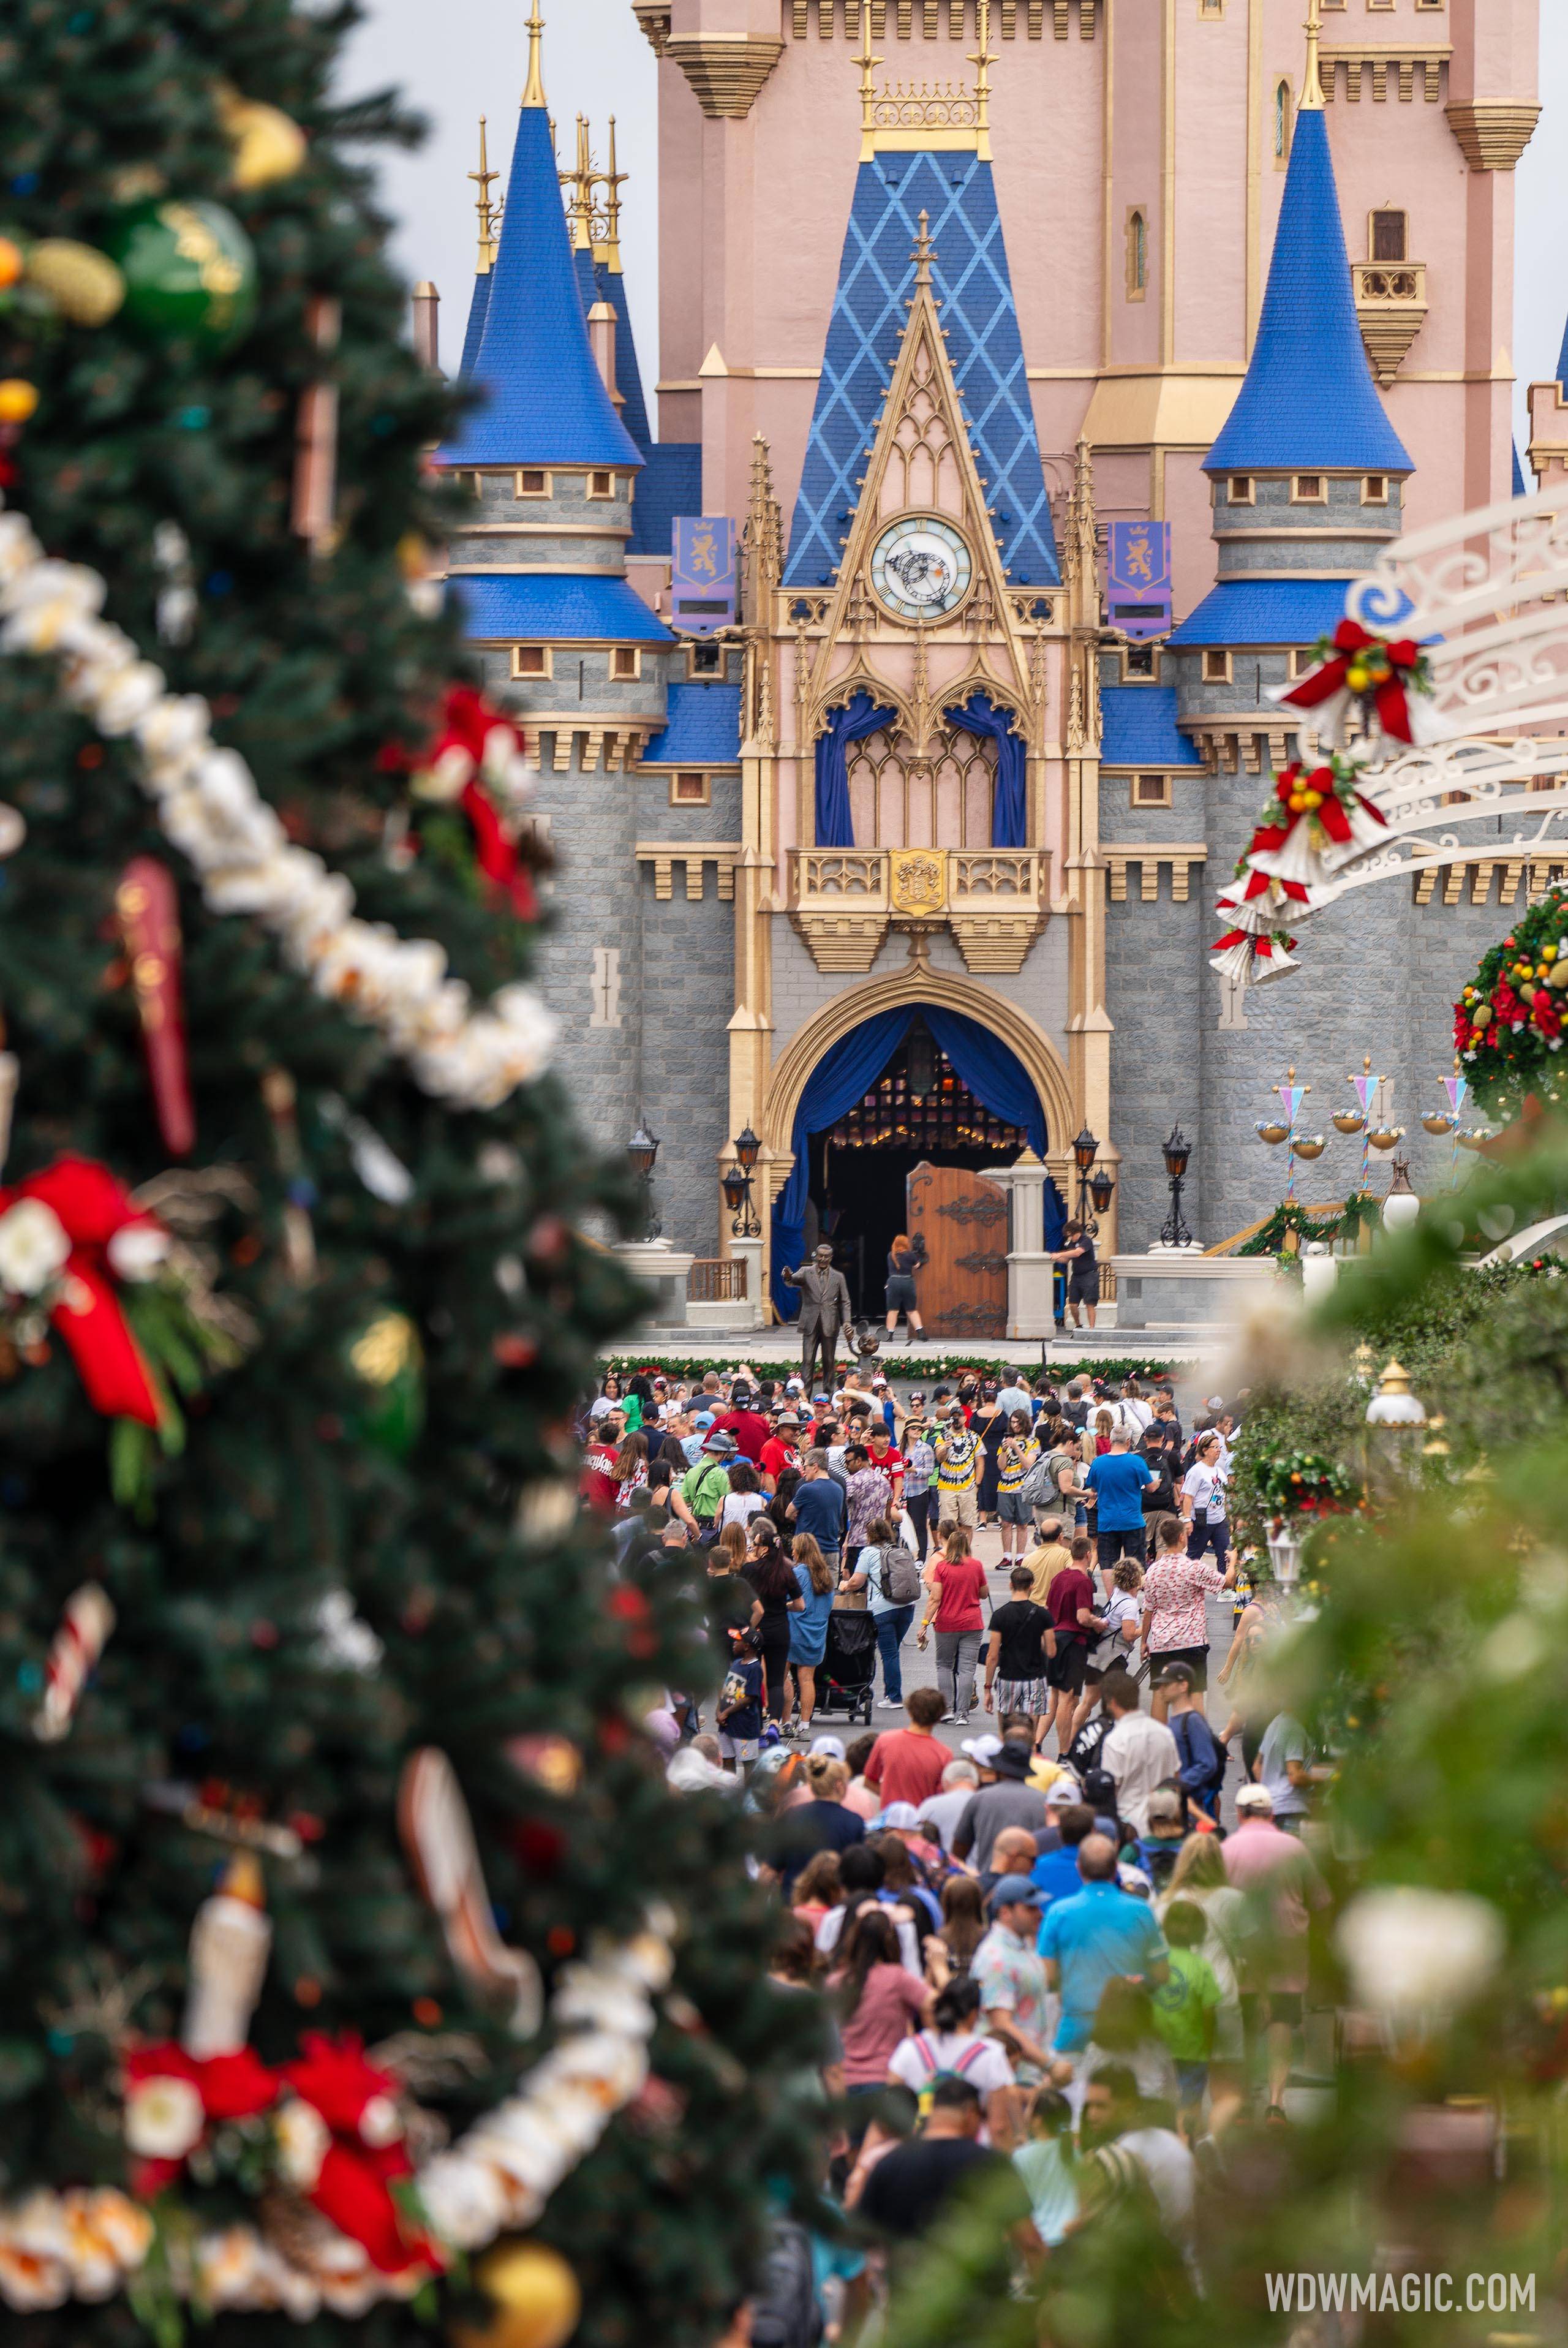 The Christmas season is coming to an end at Walt Disney World